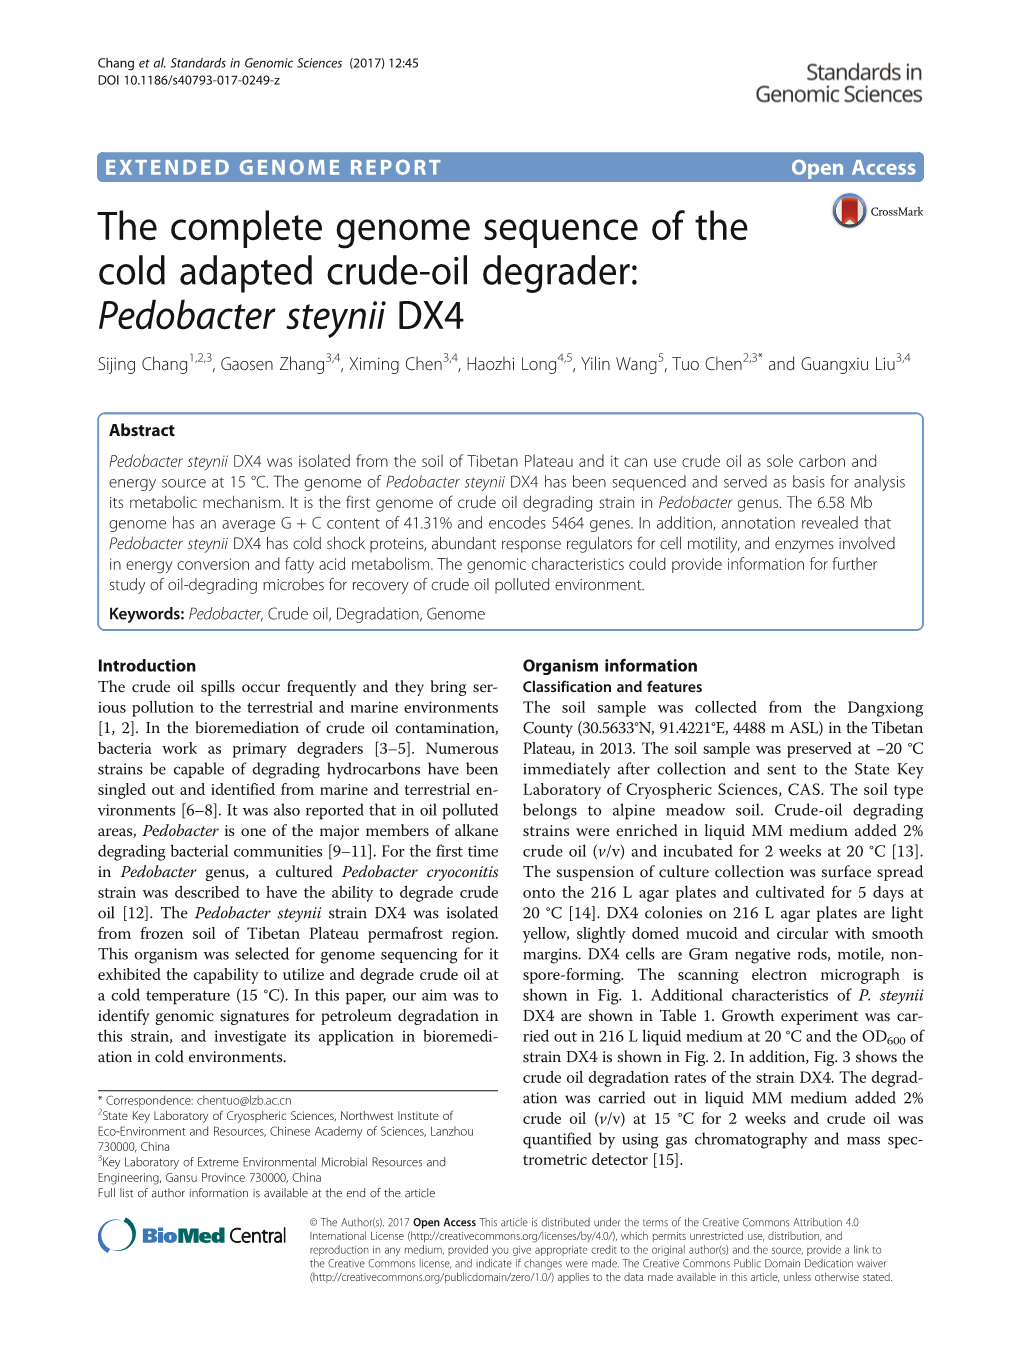 The Complete Genome Sequence of the Cold Adapted Crude-Oil Degrader